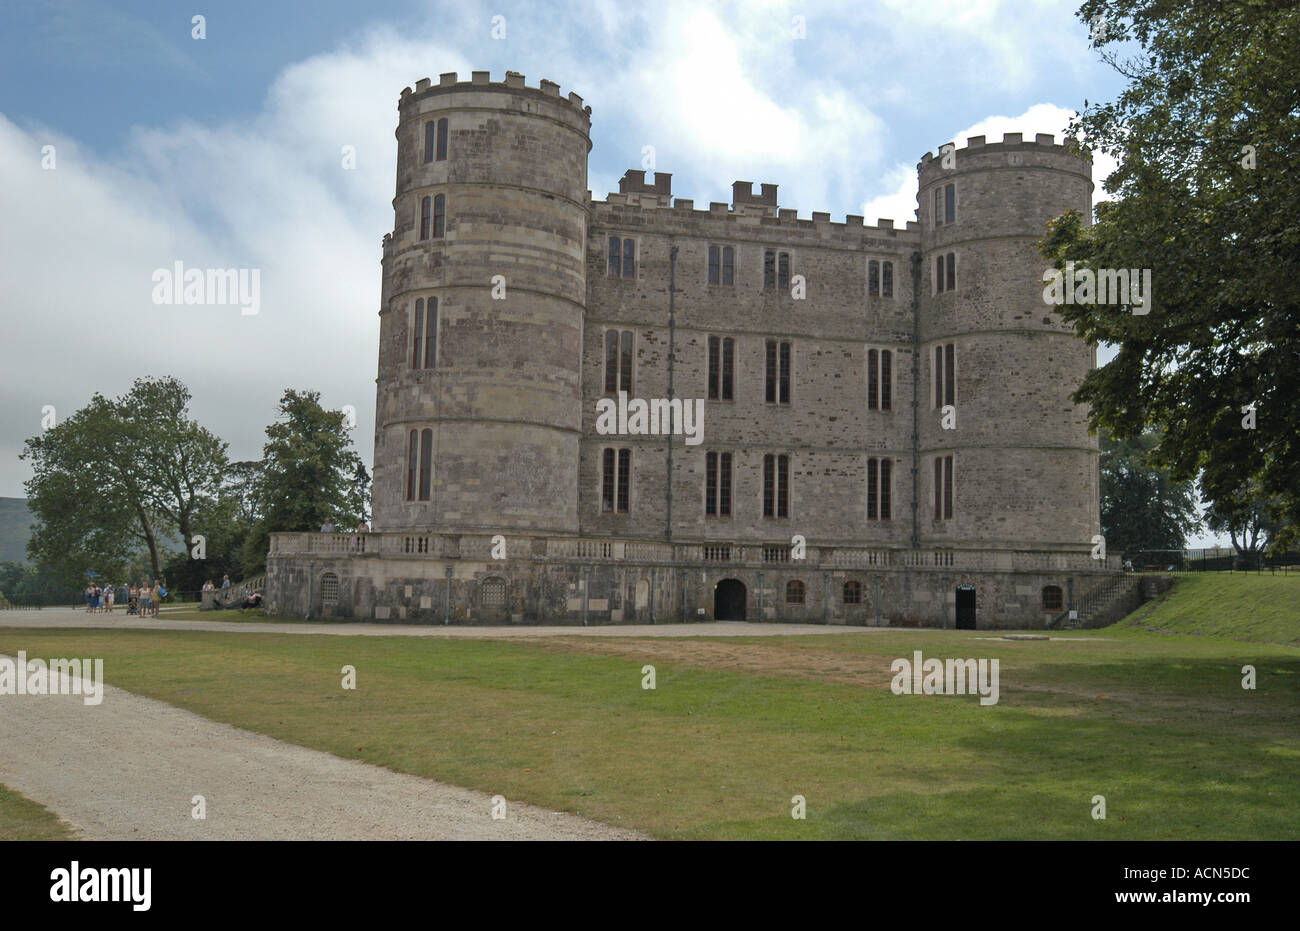 Lulworth Castle Church, set in the Purbeck Hills of Dorset, England Stock Photo